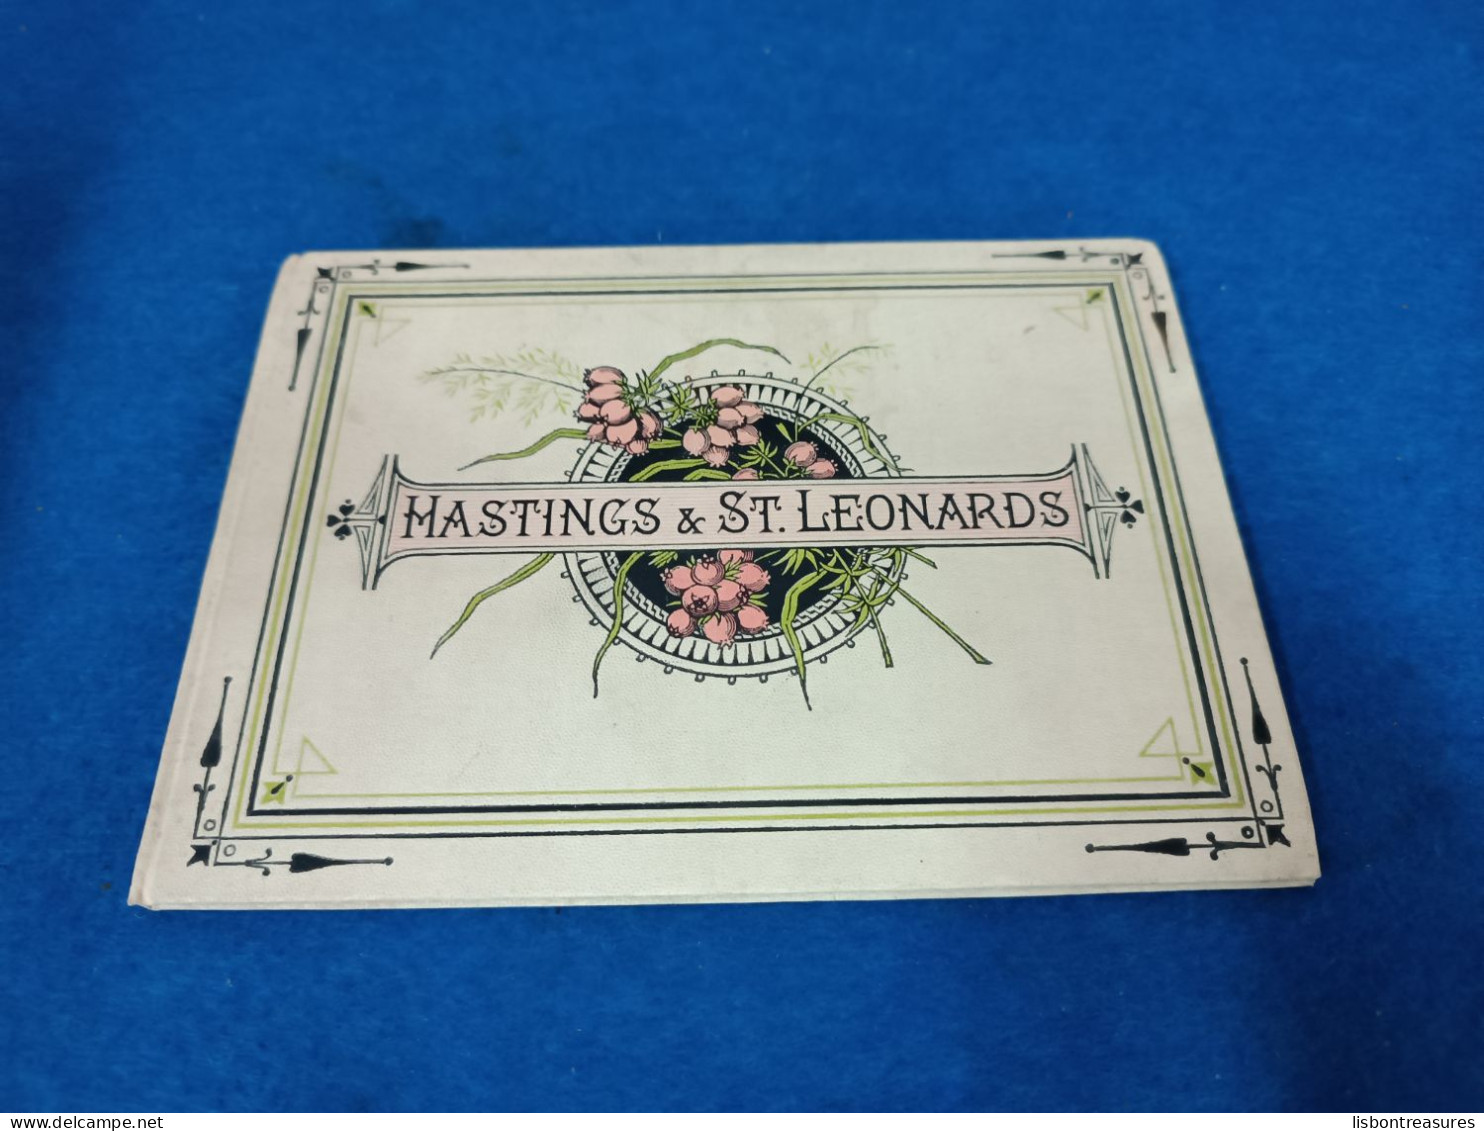 VERY RARE HASTINGS & ST. LEONARDS VIEWS BOOKLET WITH 10 VIEWS / PAGES EARLY XX - Hastings